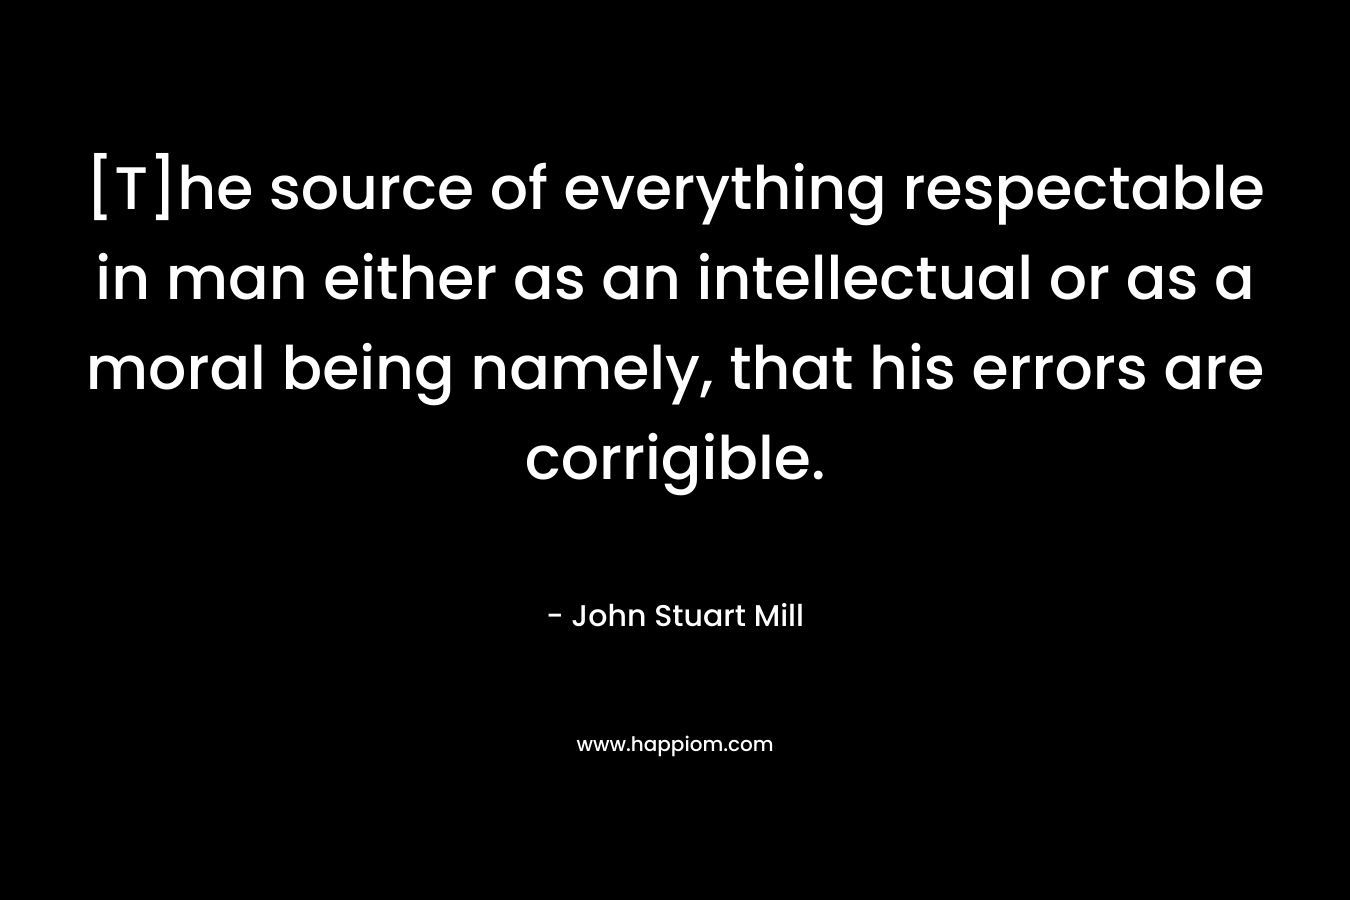 [T]he source of everything respectable in man either as an intellectual or as a moral being namely, that his errors are corrigible.